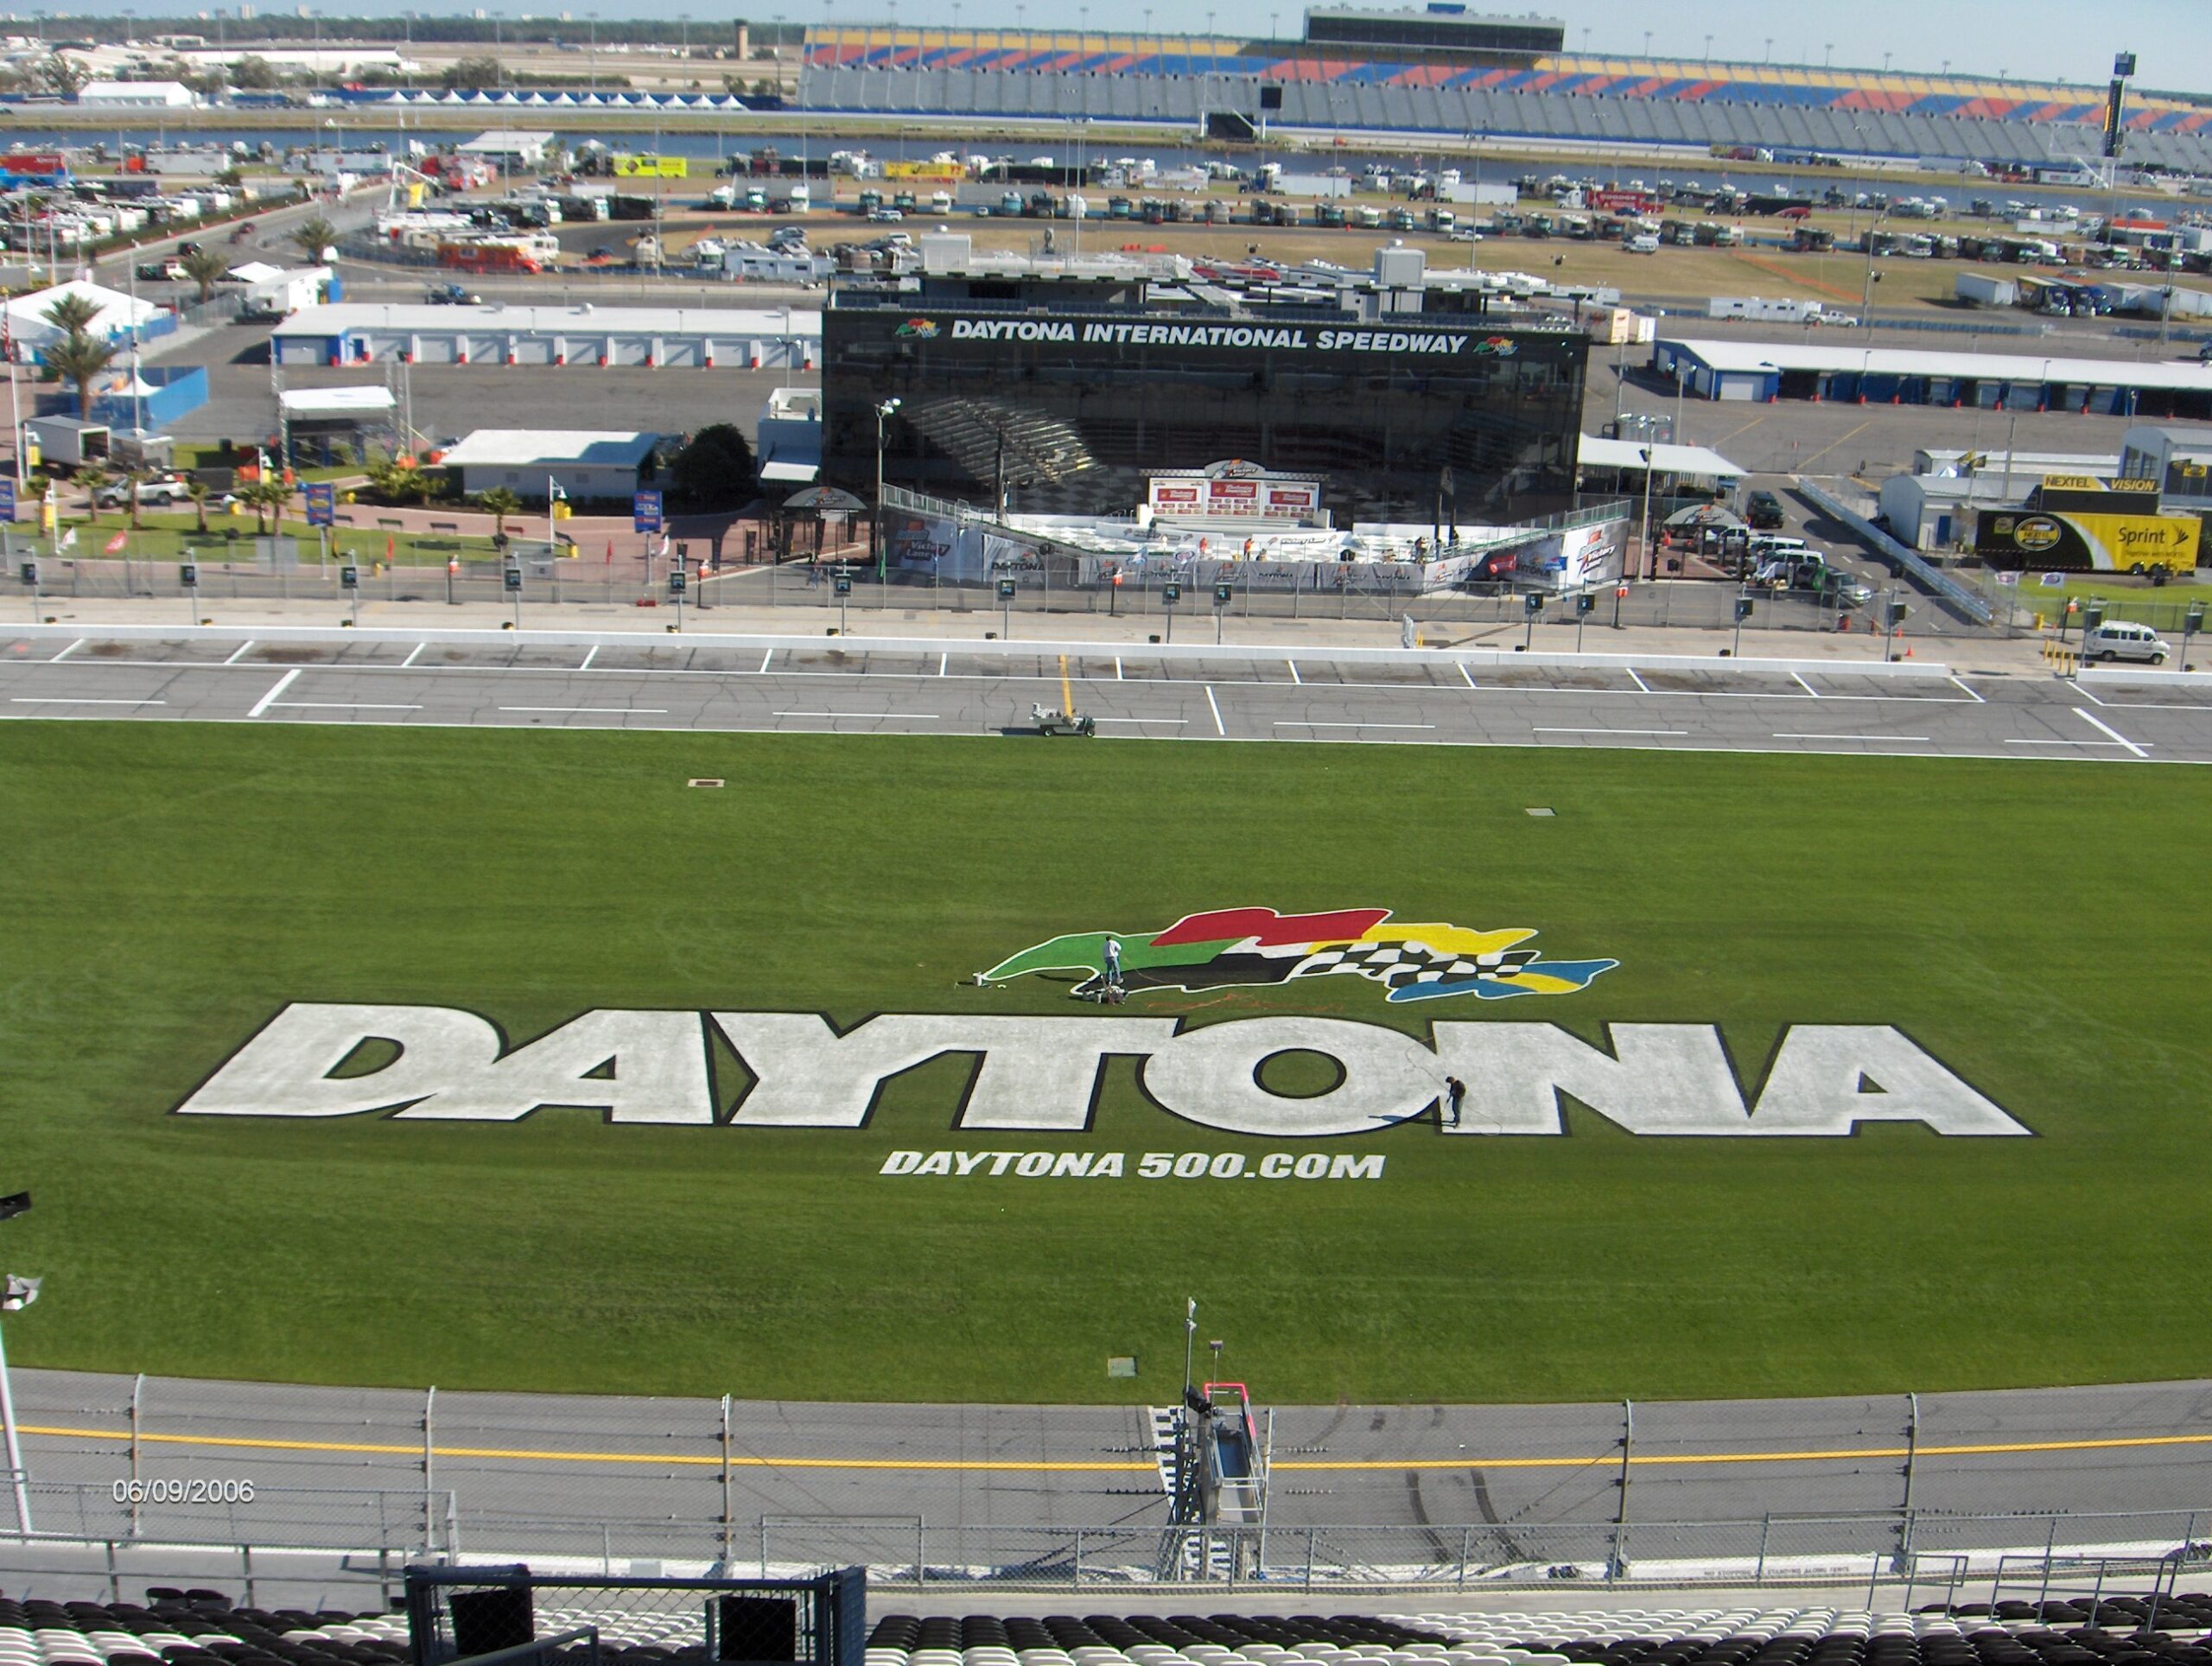 Get the latest NASCAR Cup Series results from Daytona